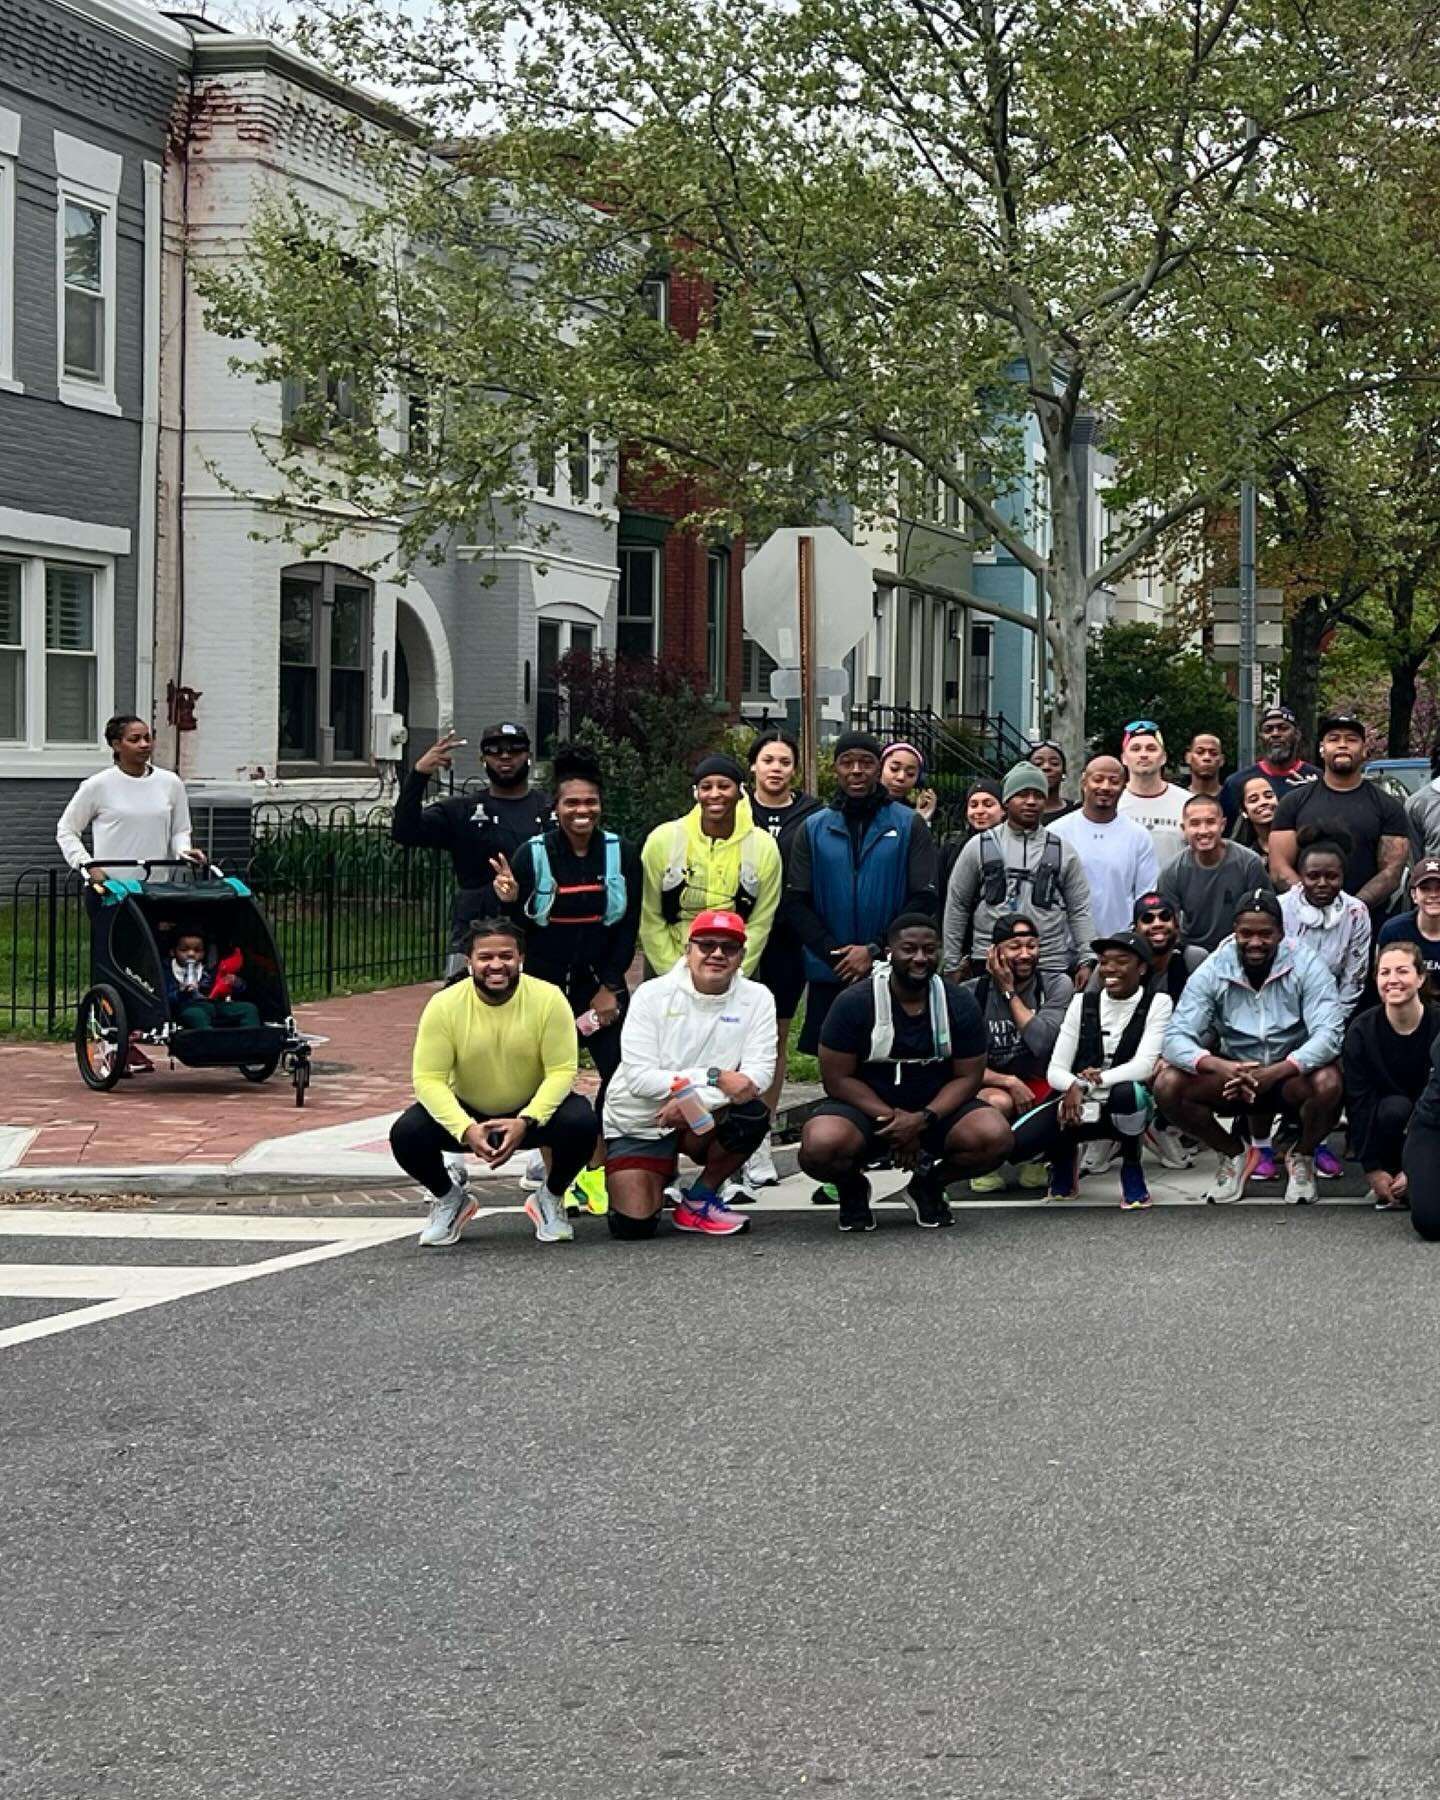 Saturday runs are back in action. Shoutout to all the newbies that came out today. Long runs are for the weekends! #rundrc #rundc